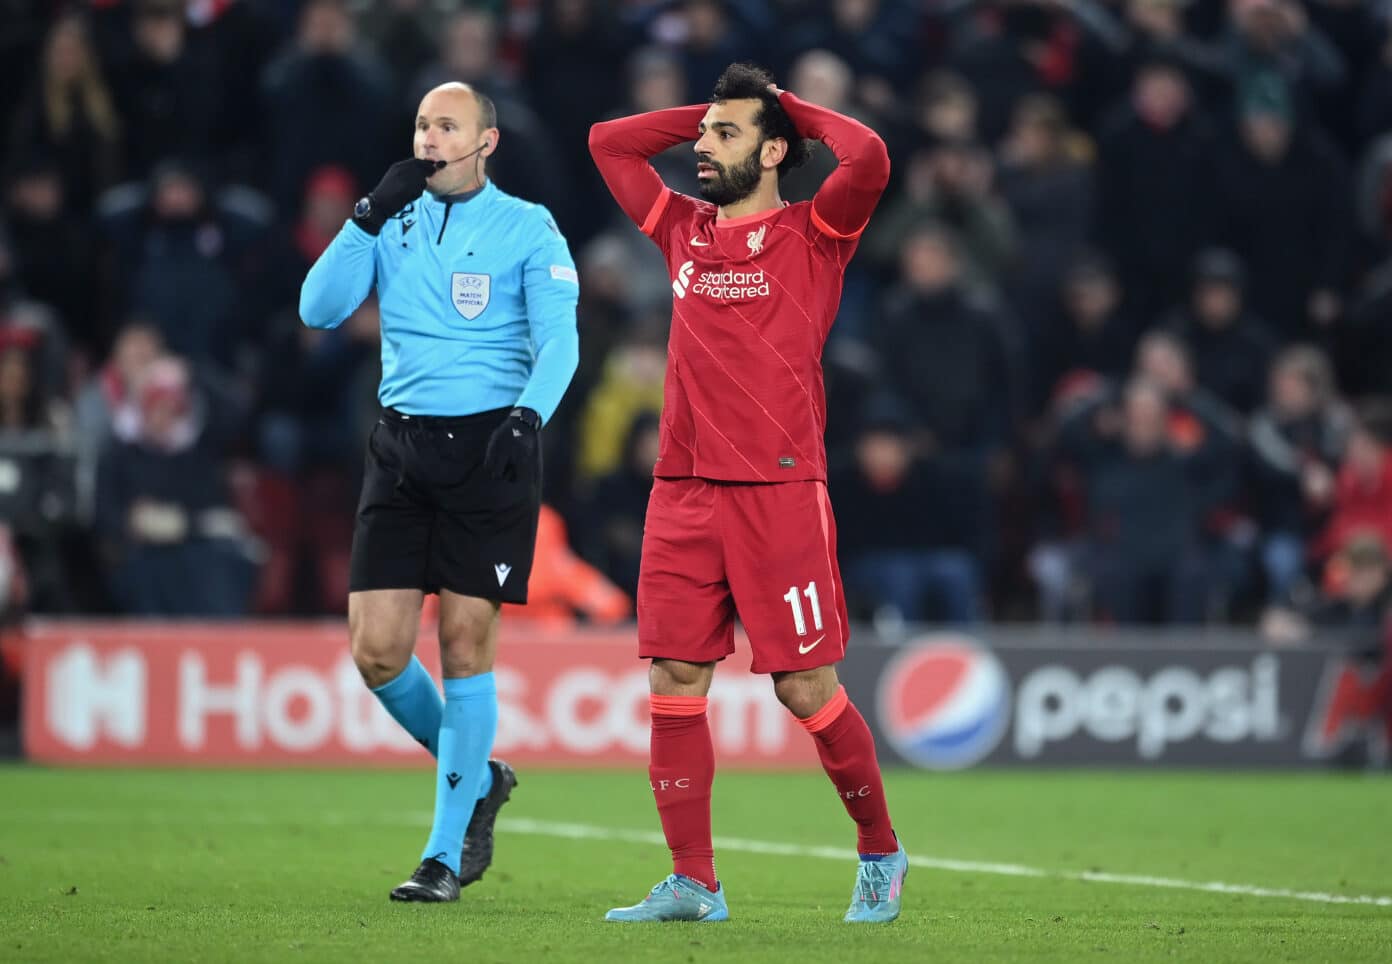 Liverpool 0-1 Inter Milan (2-1 agg) - Watch all the highlights (Video)